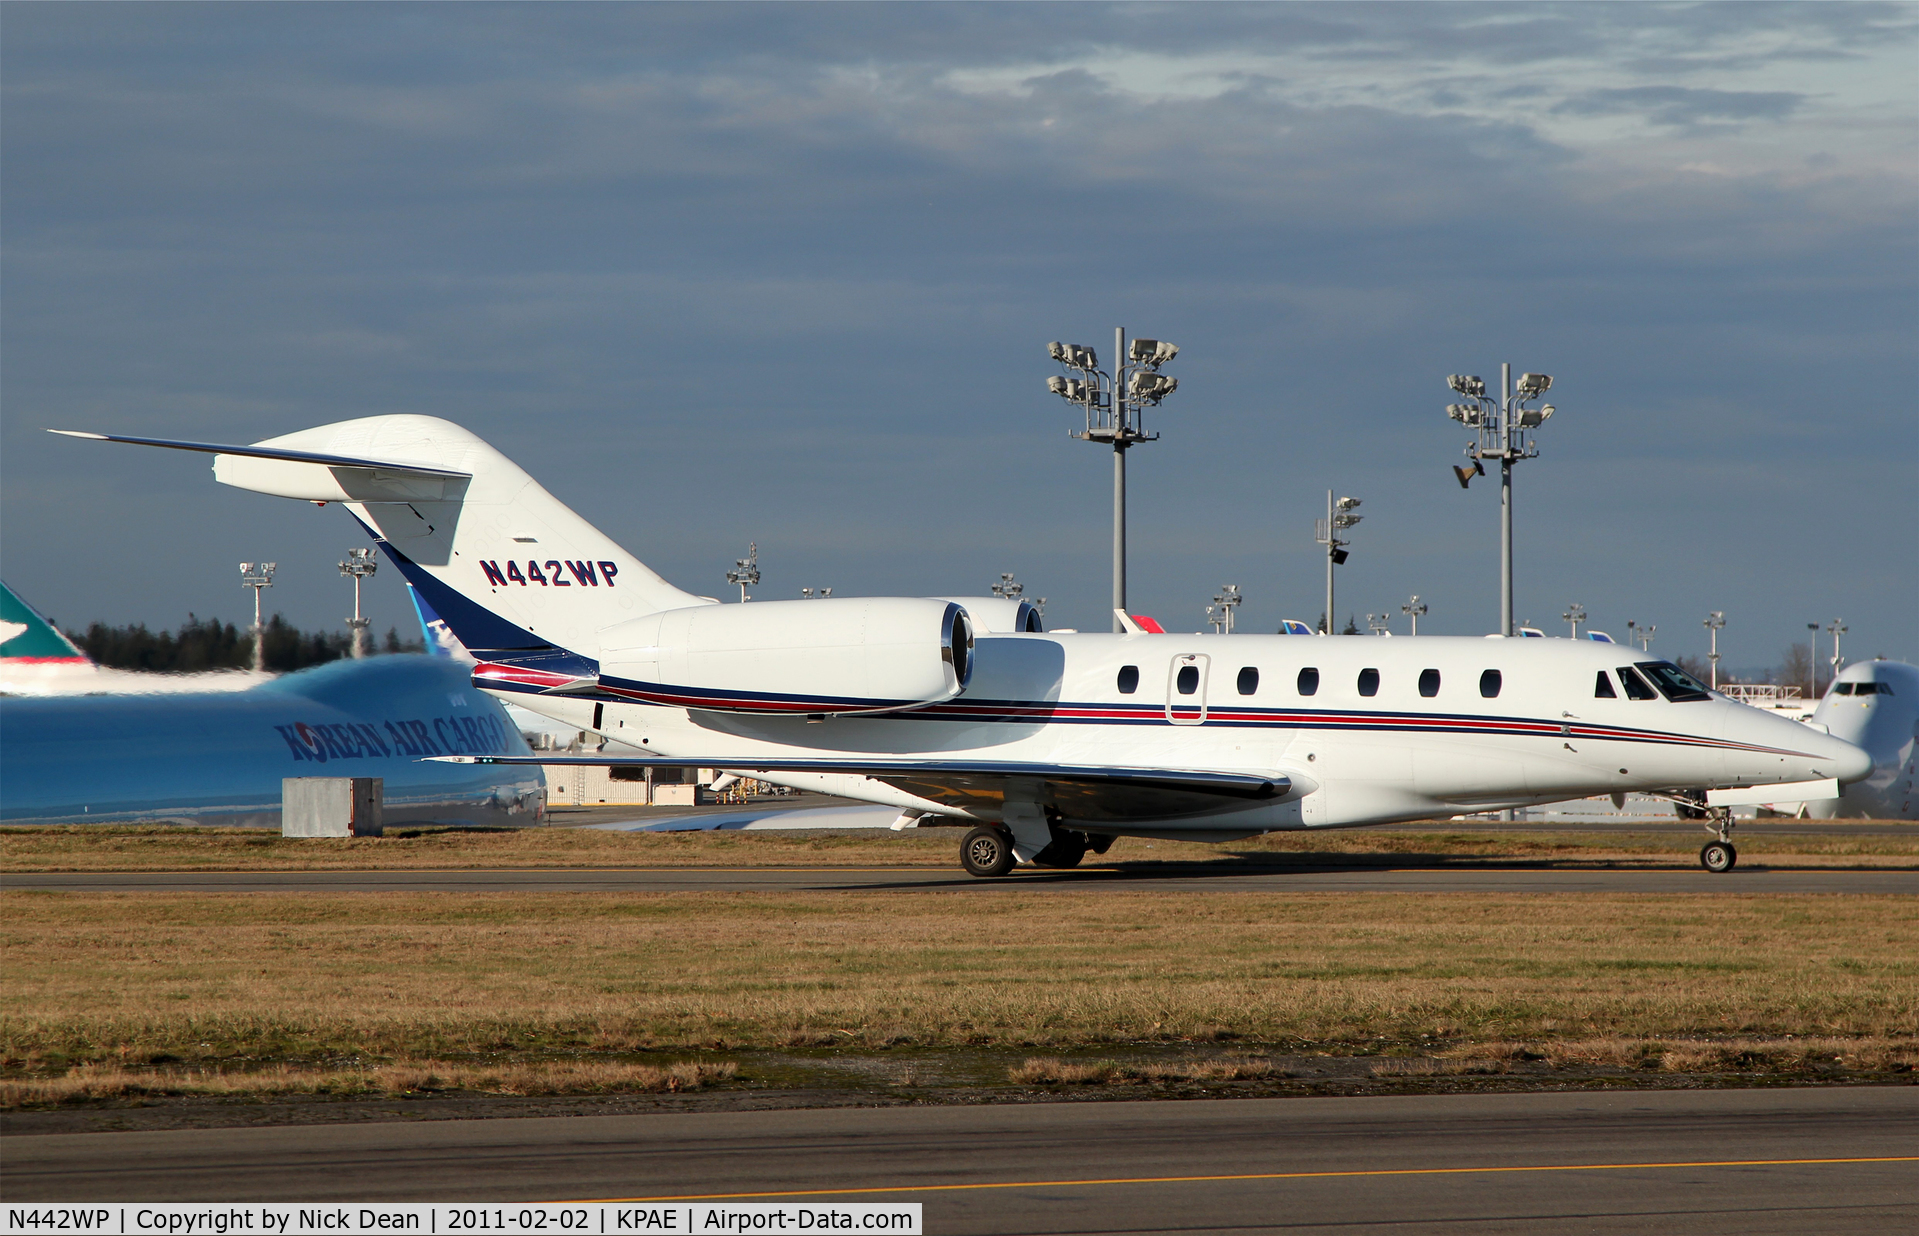 N442WP, 2004 Cessna 750 Citation X Citation X C/N 750-0233, KPAE FIV502 arriving from KICT subsequently departed to KSEA